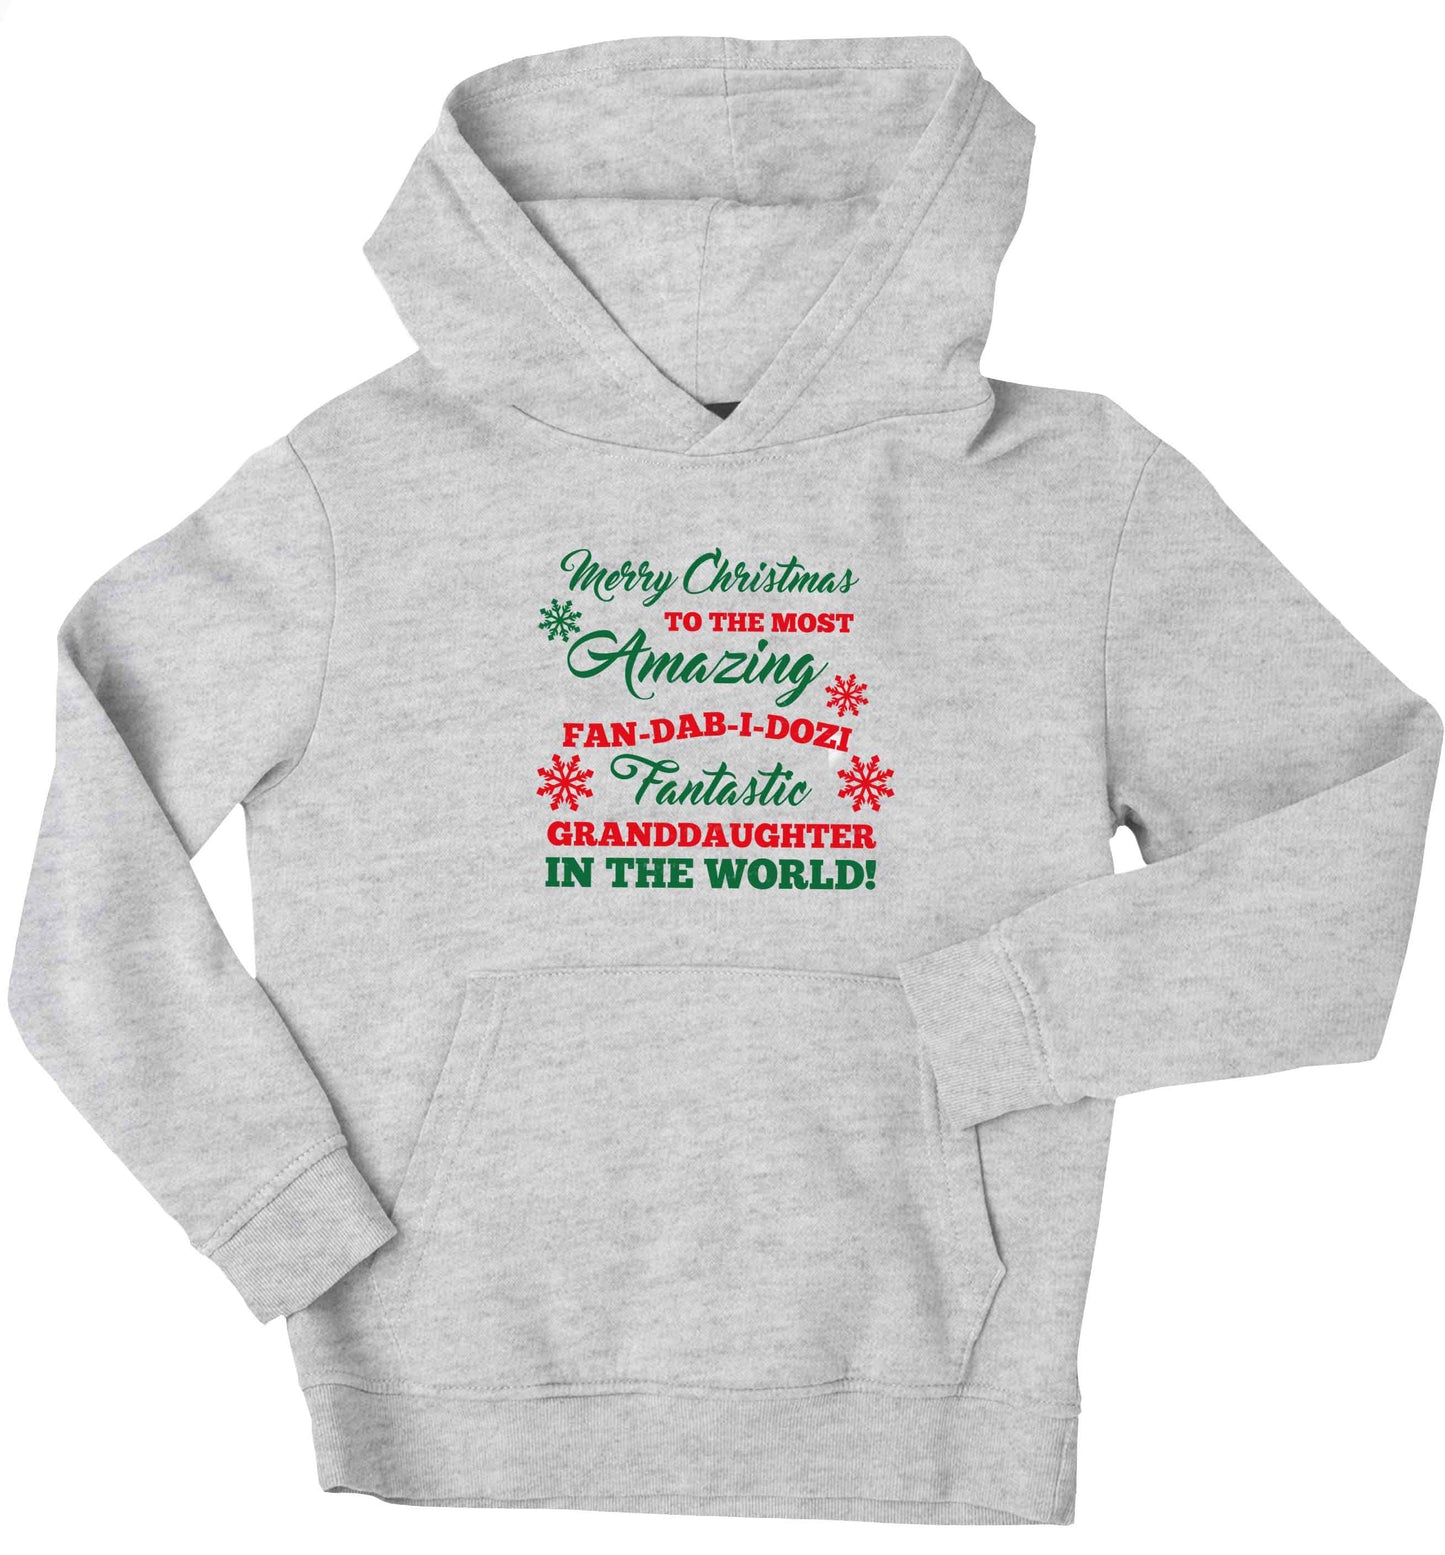 Merry Christmas to the most amazing fan-dab-i-dozi fantasic Granddaughter in the world children's grey hoodie 12-13 Years